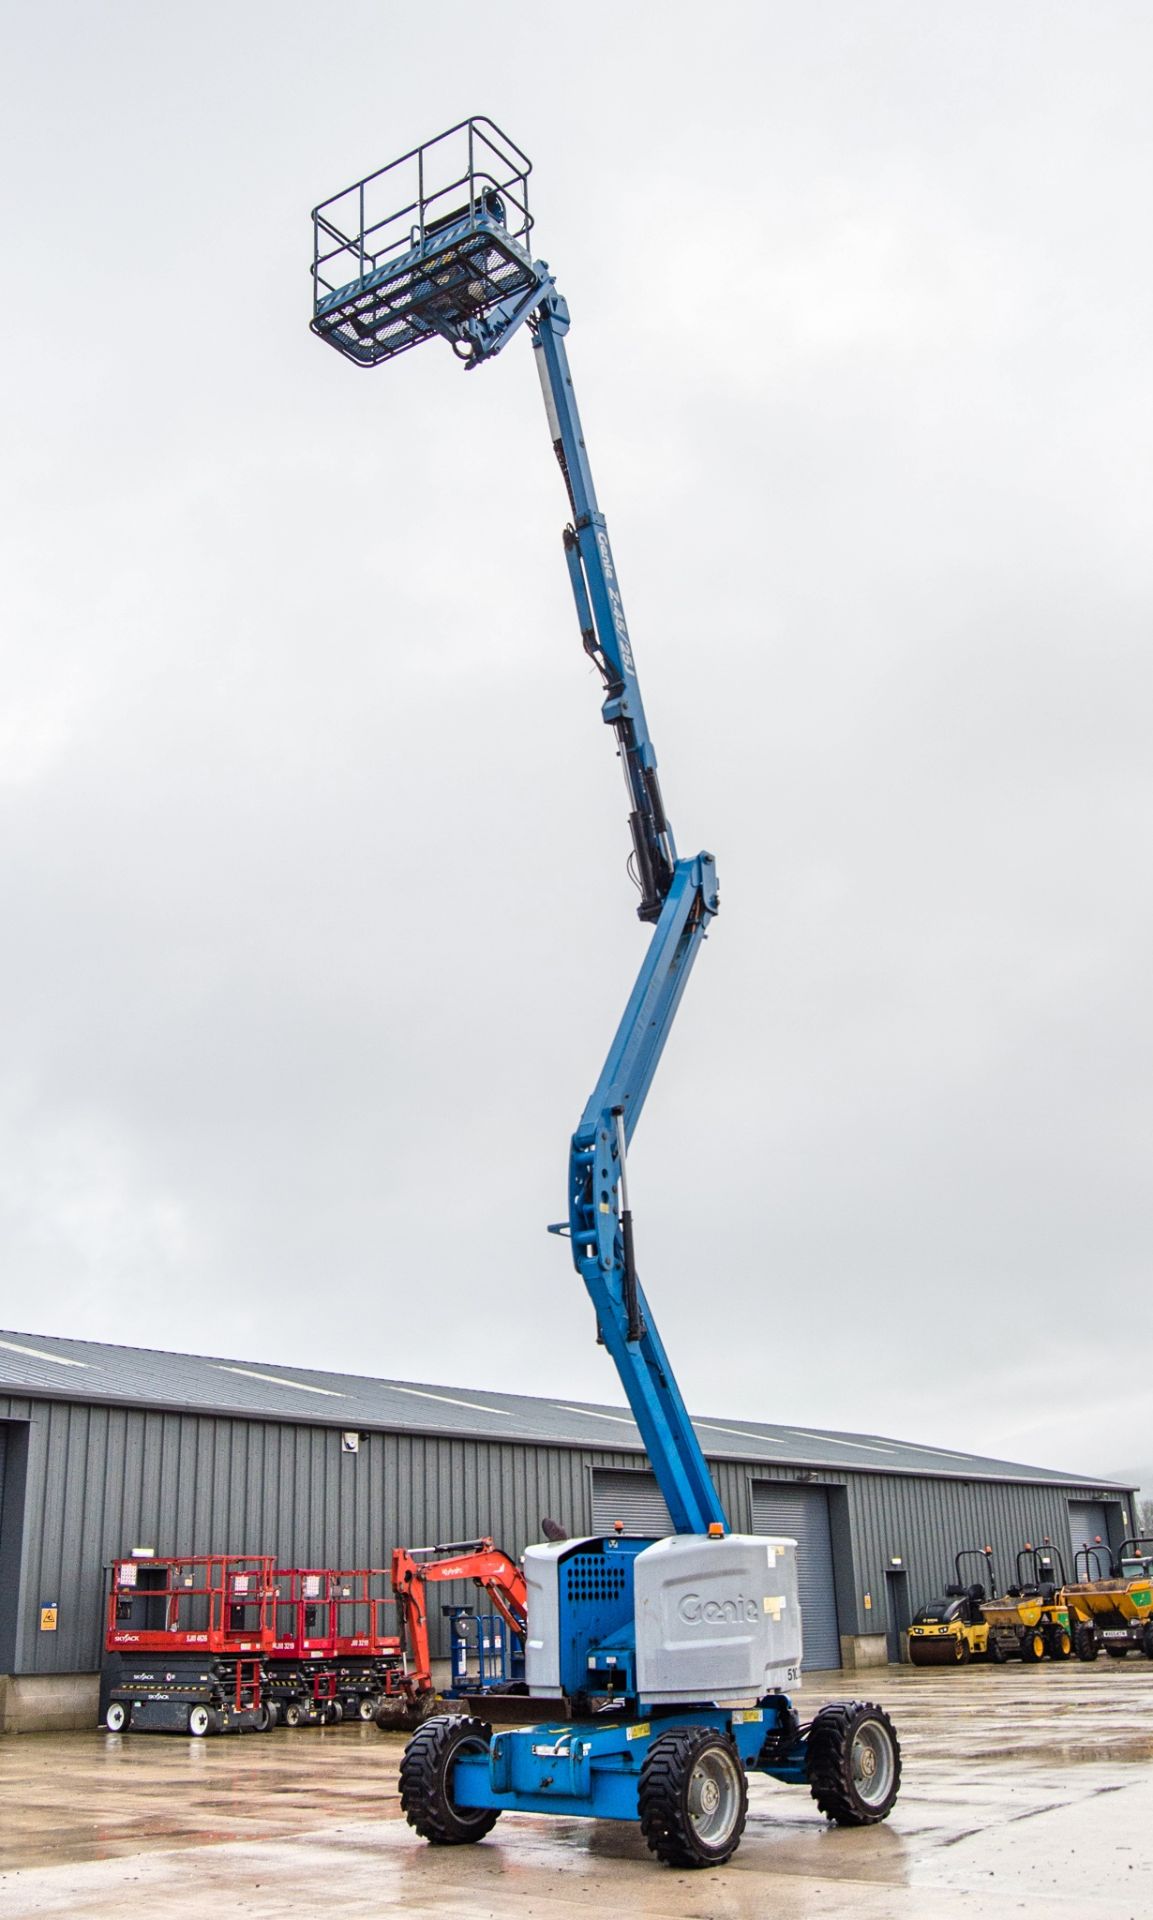 Genie Z45/25J diesel/battery electric 4 wheel drive articulated boom lift access platform Year: 2014 - Image 9 of 19